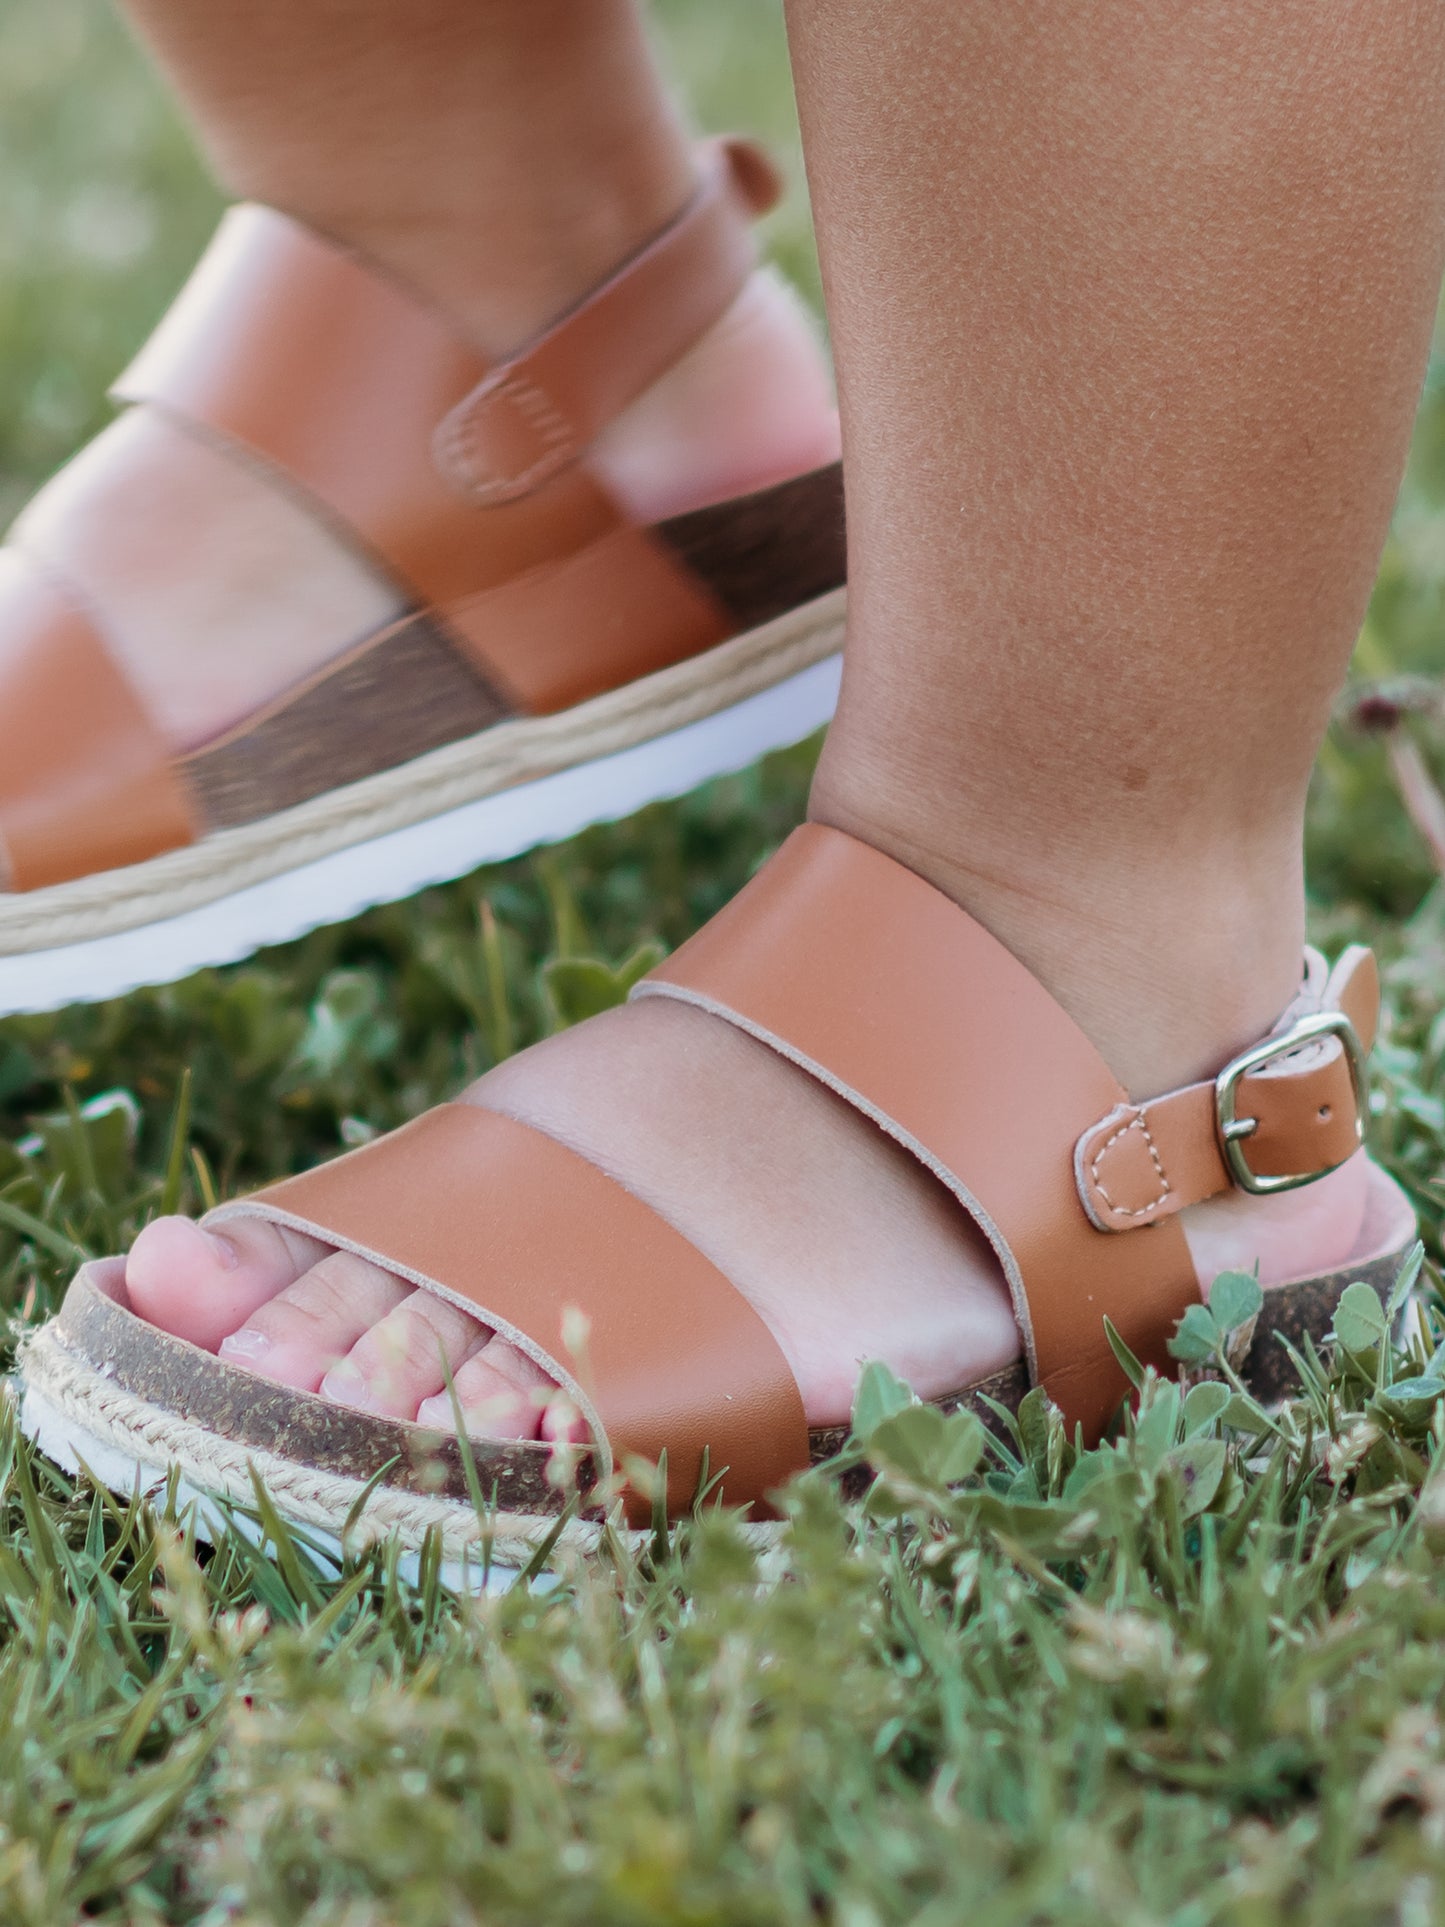 These Strappy Cork Sandals are made of wide strips of Brown manmade leather, cork sole, and have a metal adjustable buckle.